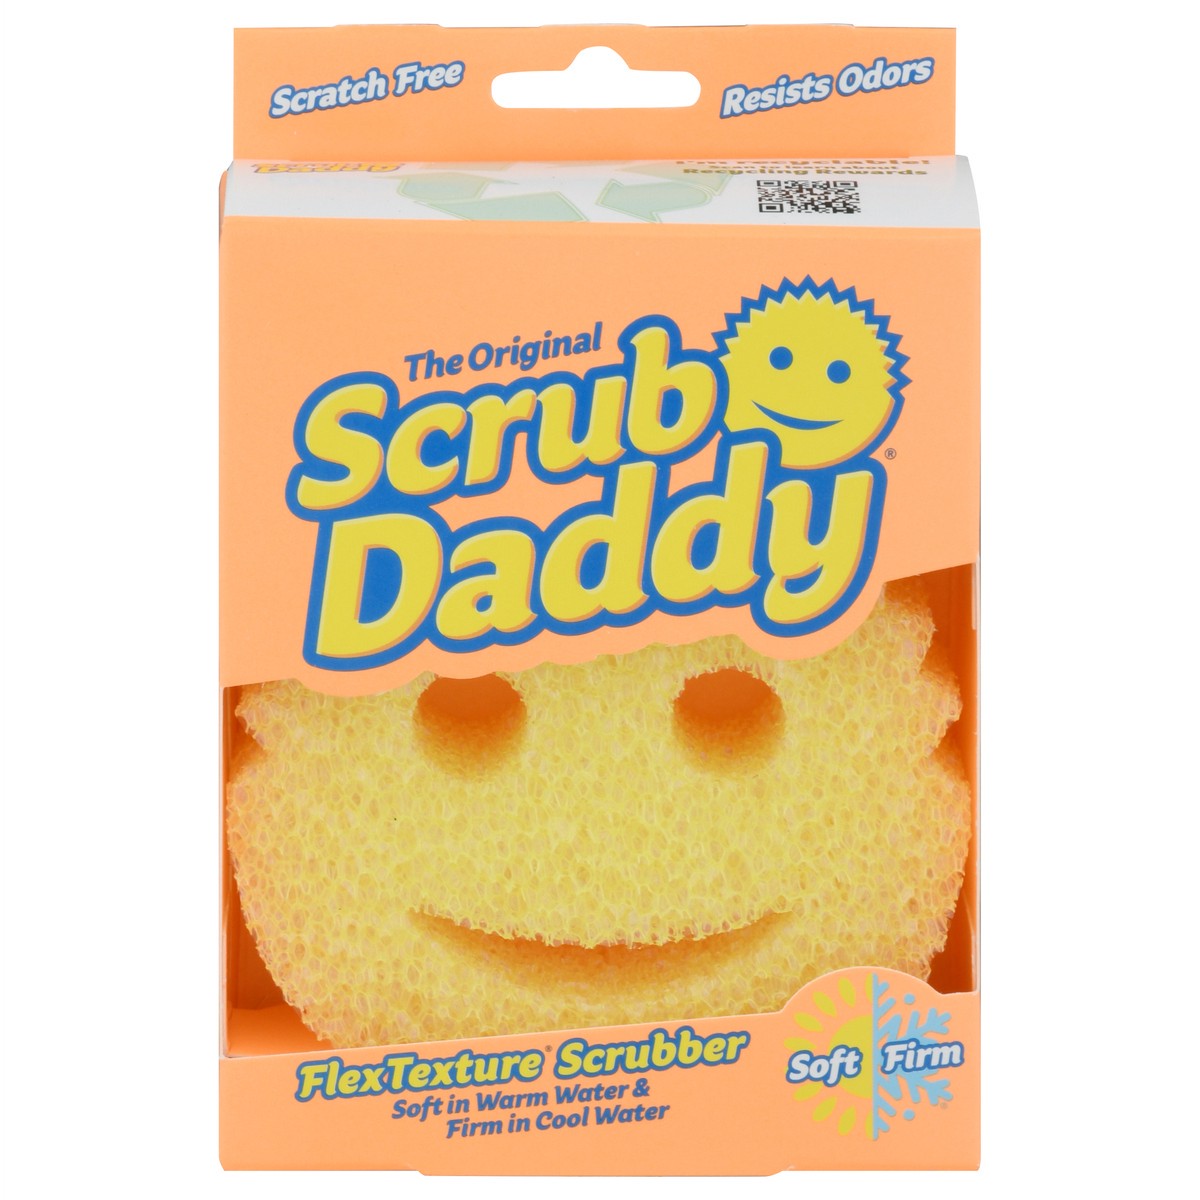 Scrub Daddy Brand's Marketing Strategy That has Catapulted it